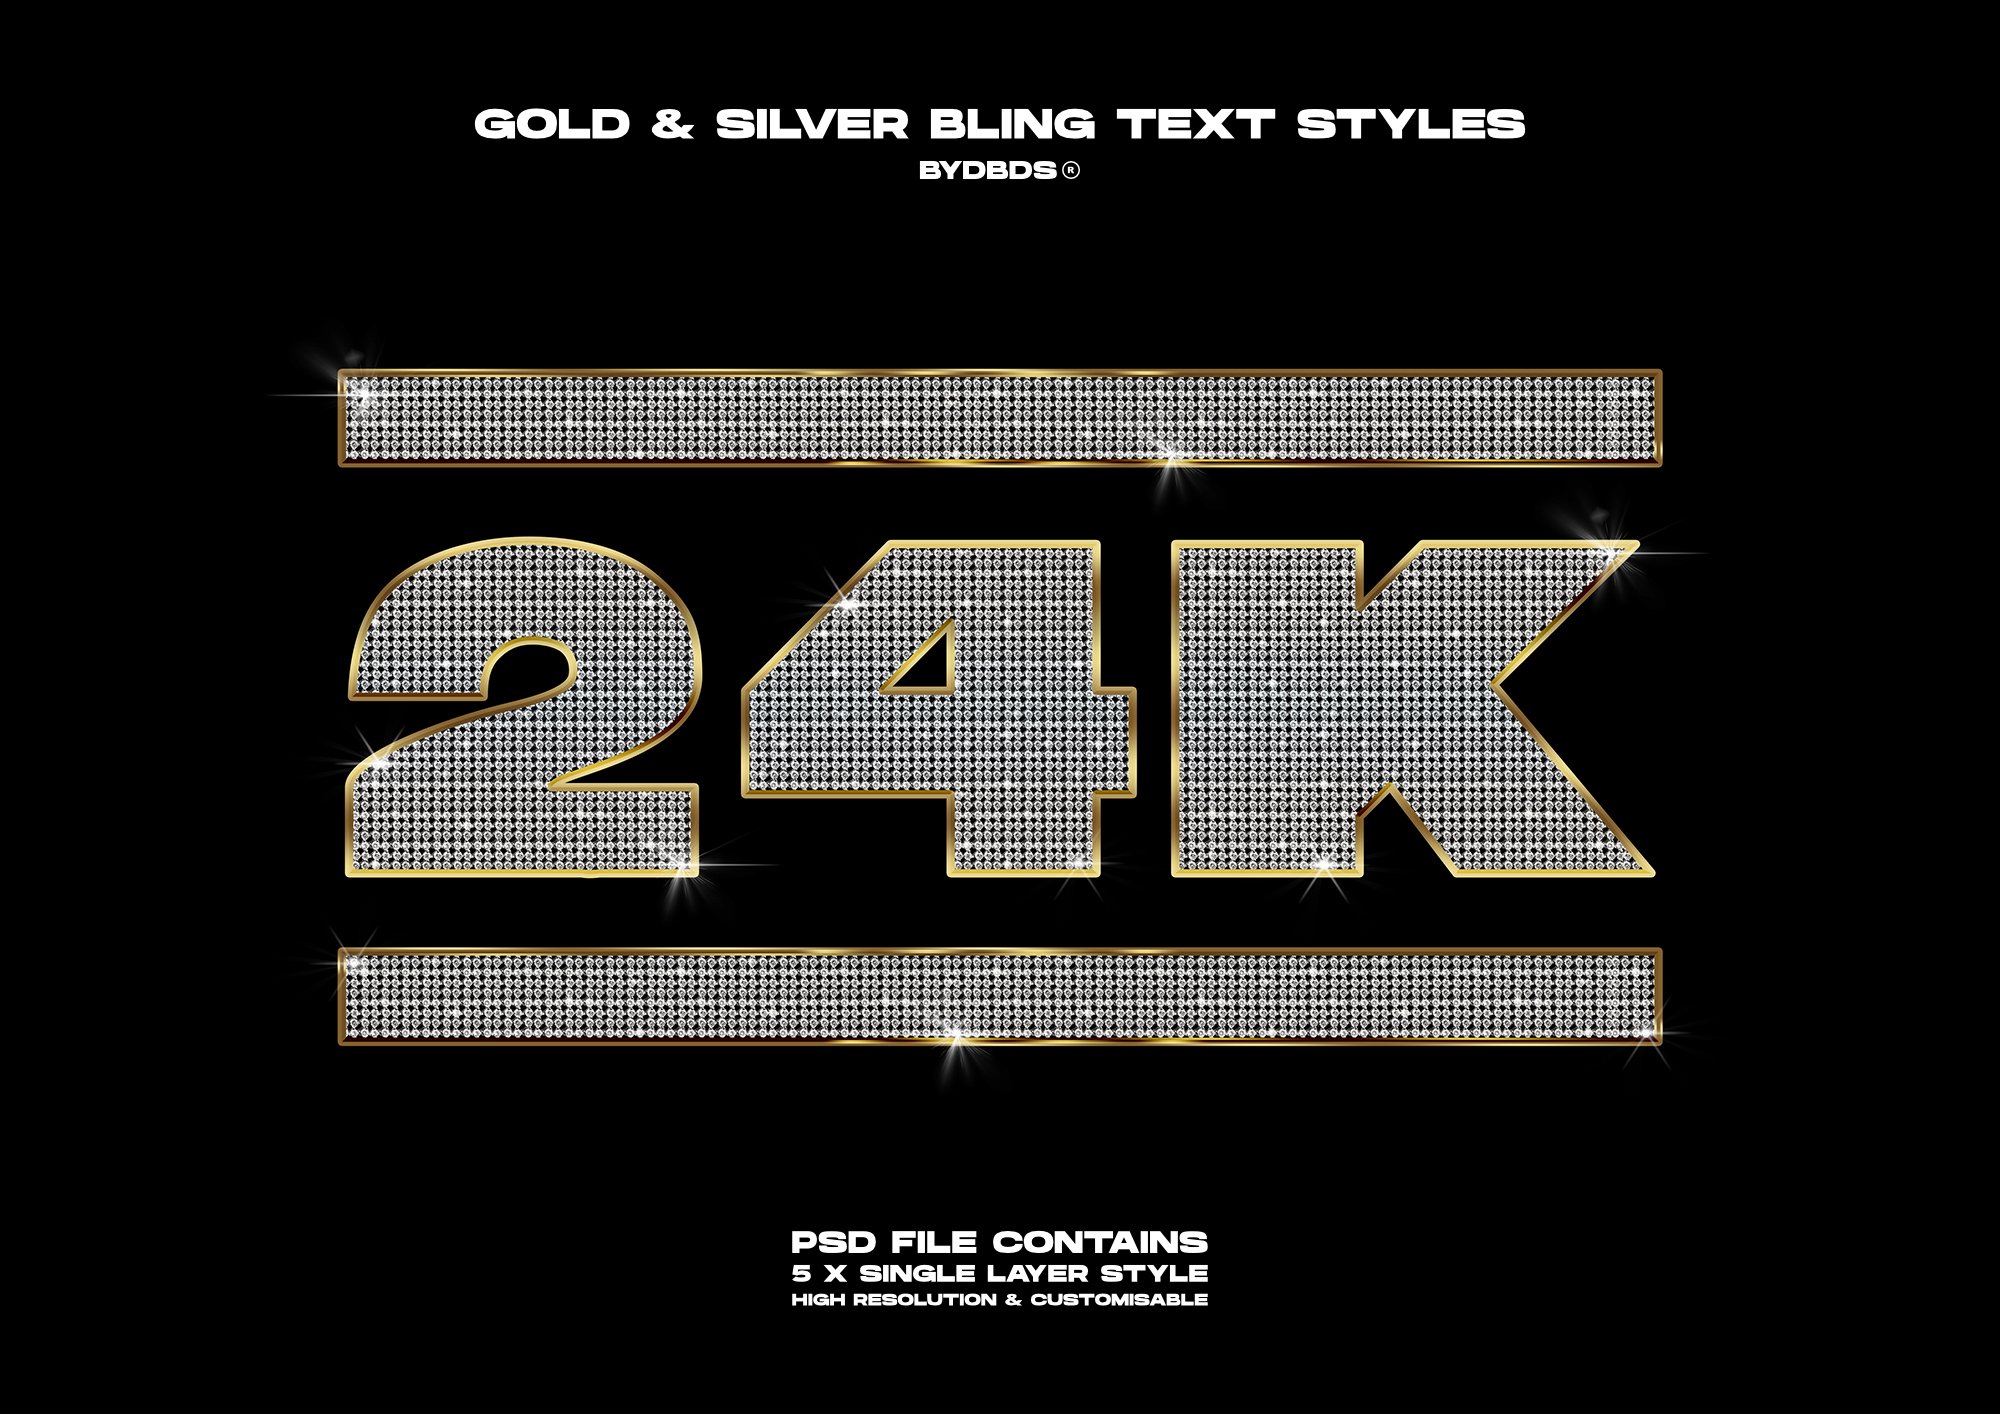 Gold & Diamond 'Bling' Text Stylespreview image.